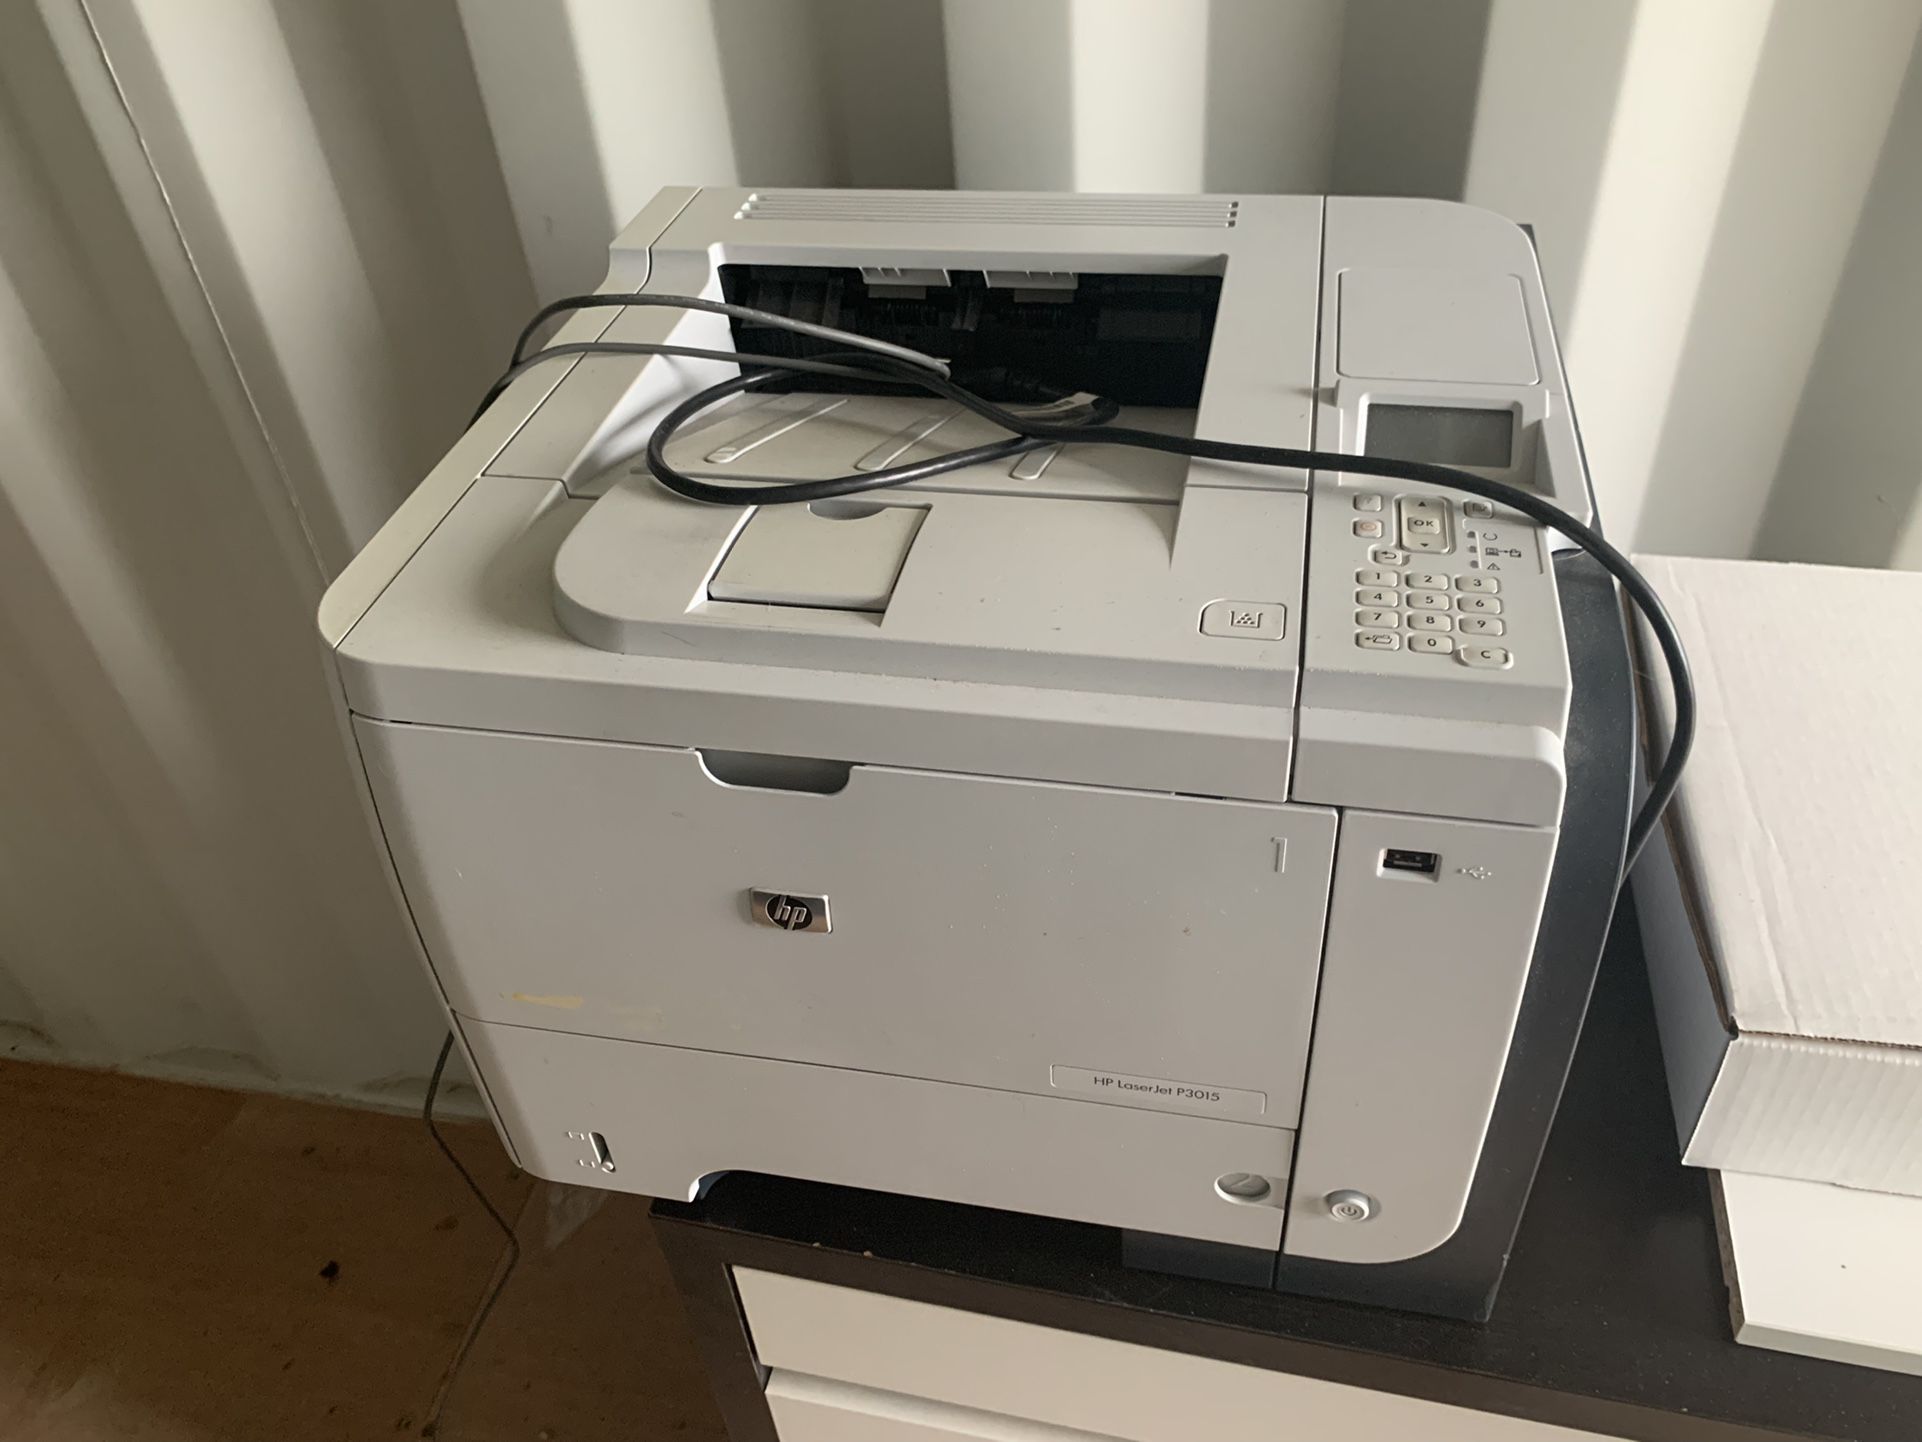 HP Laser Jet P3015, Works Great Just Don’t Need Anymore 